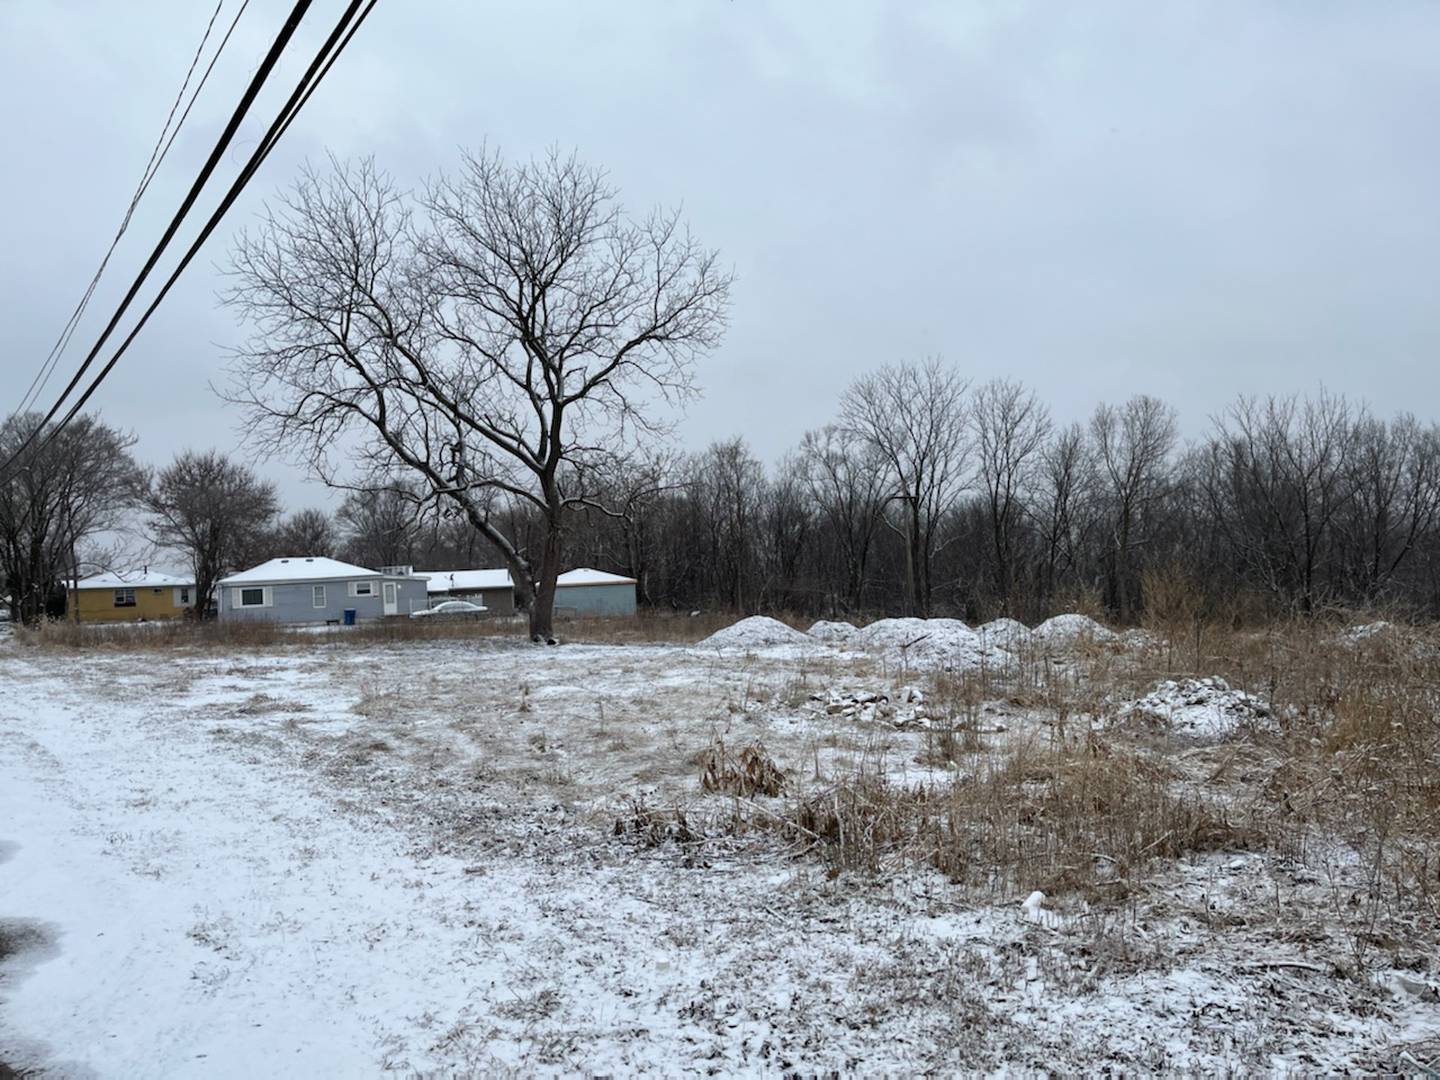 An open field in the 700 block of Patterson Road in Joliet Township seen on Thursday, Feb. 24, 2022. Three men discovered human remains in a wooded area north of Patterson Road on Wednesday, Feb. 23, 2022.